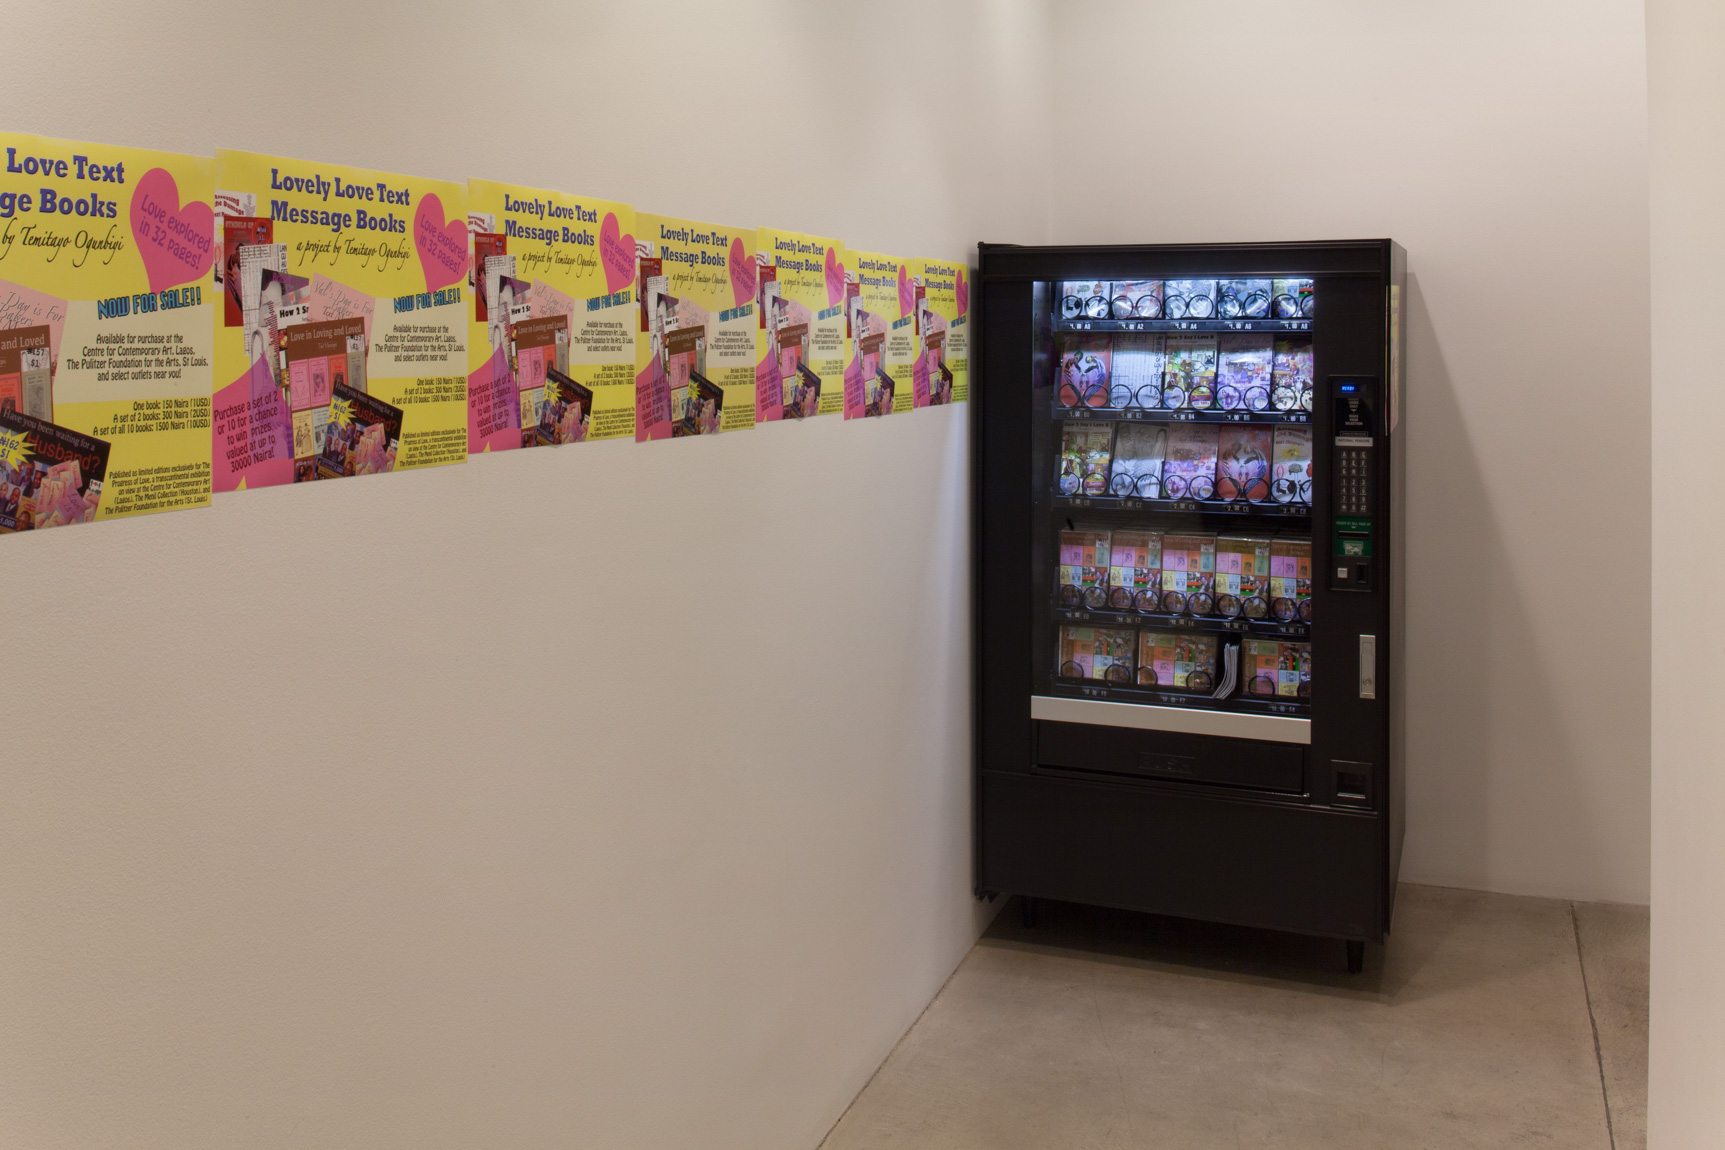 An exhibition view of Temitayo Ogunbiyi's piece "Lovely Love Text Message Books," which includes copies of a page arranged on the wall in a line leading to a vending machine.